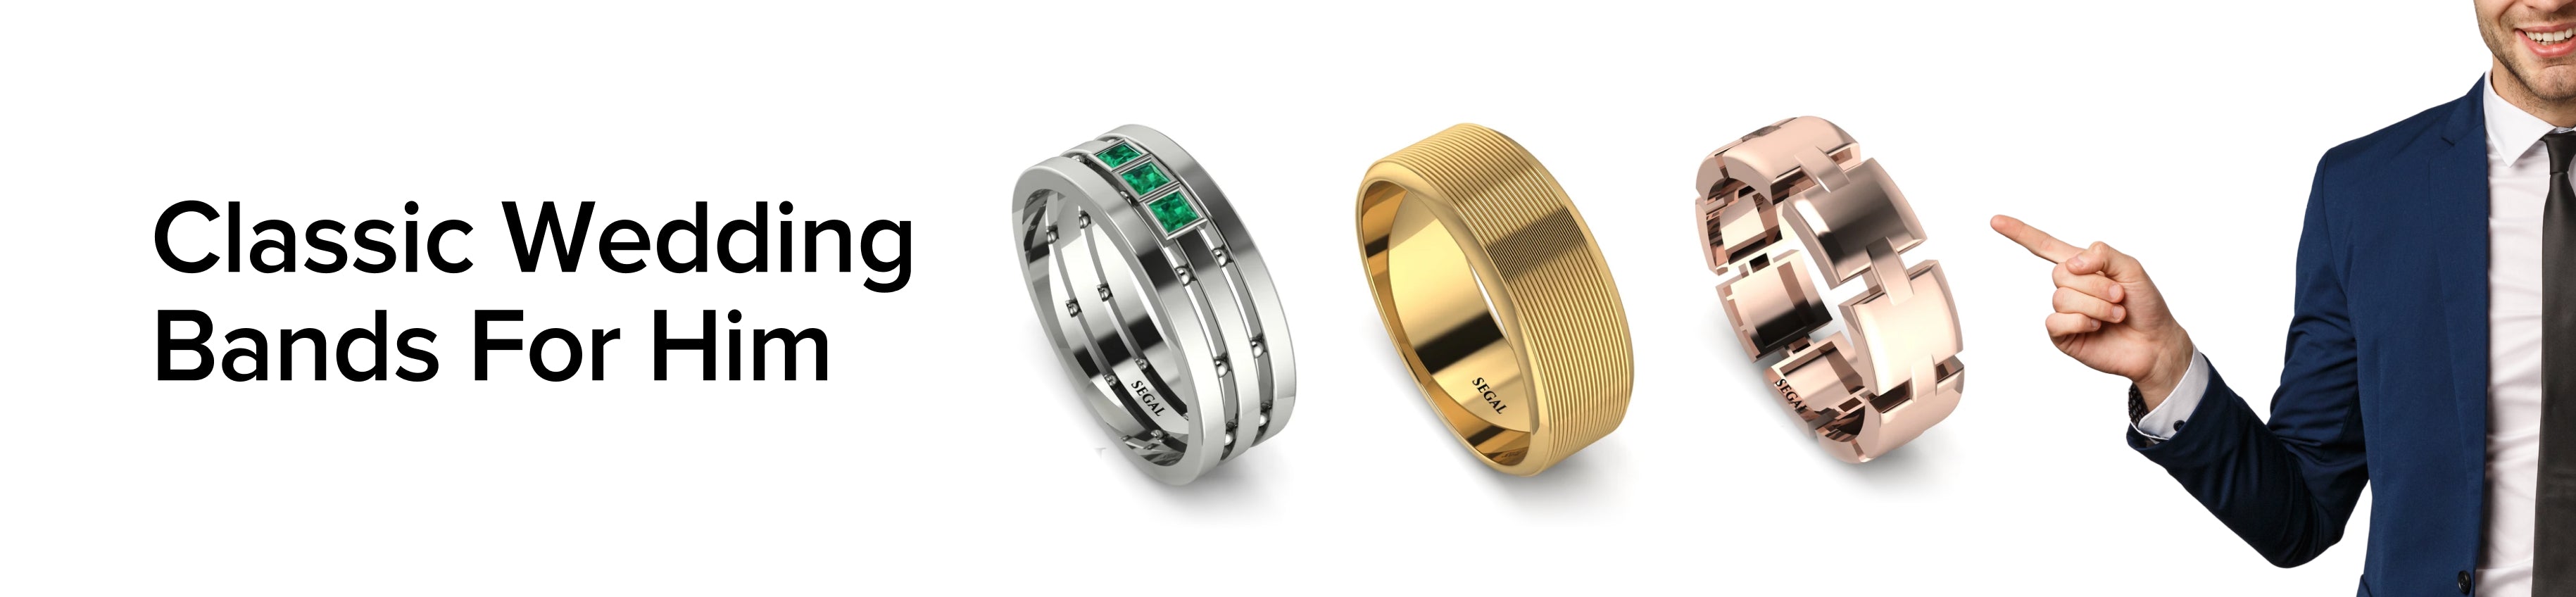 Classic Wedding Bands for Him Banner